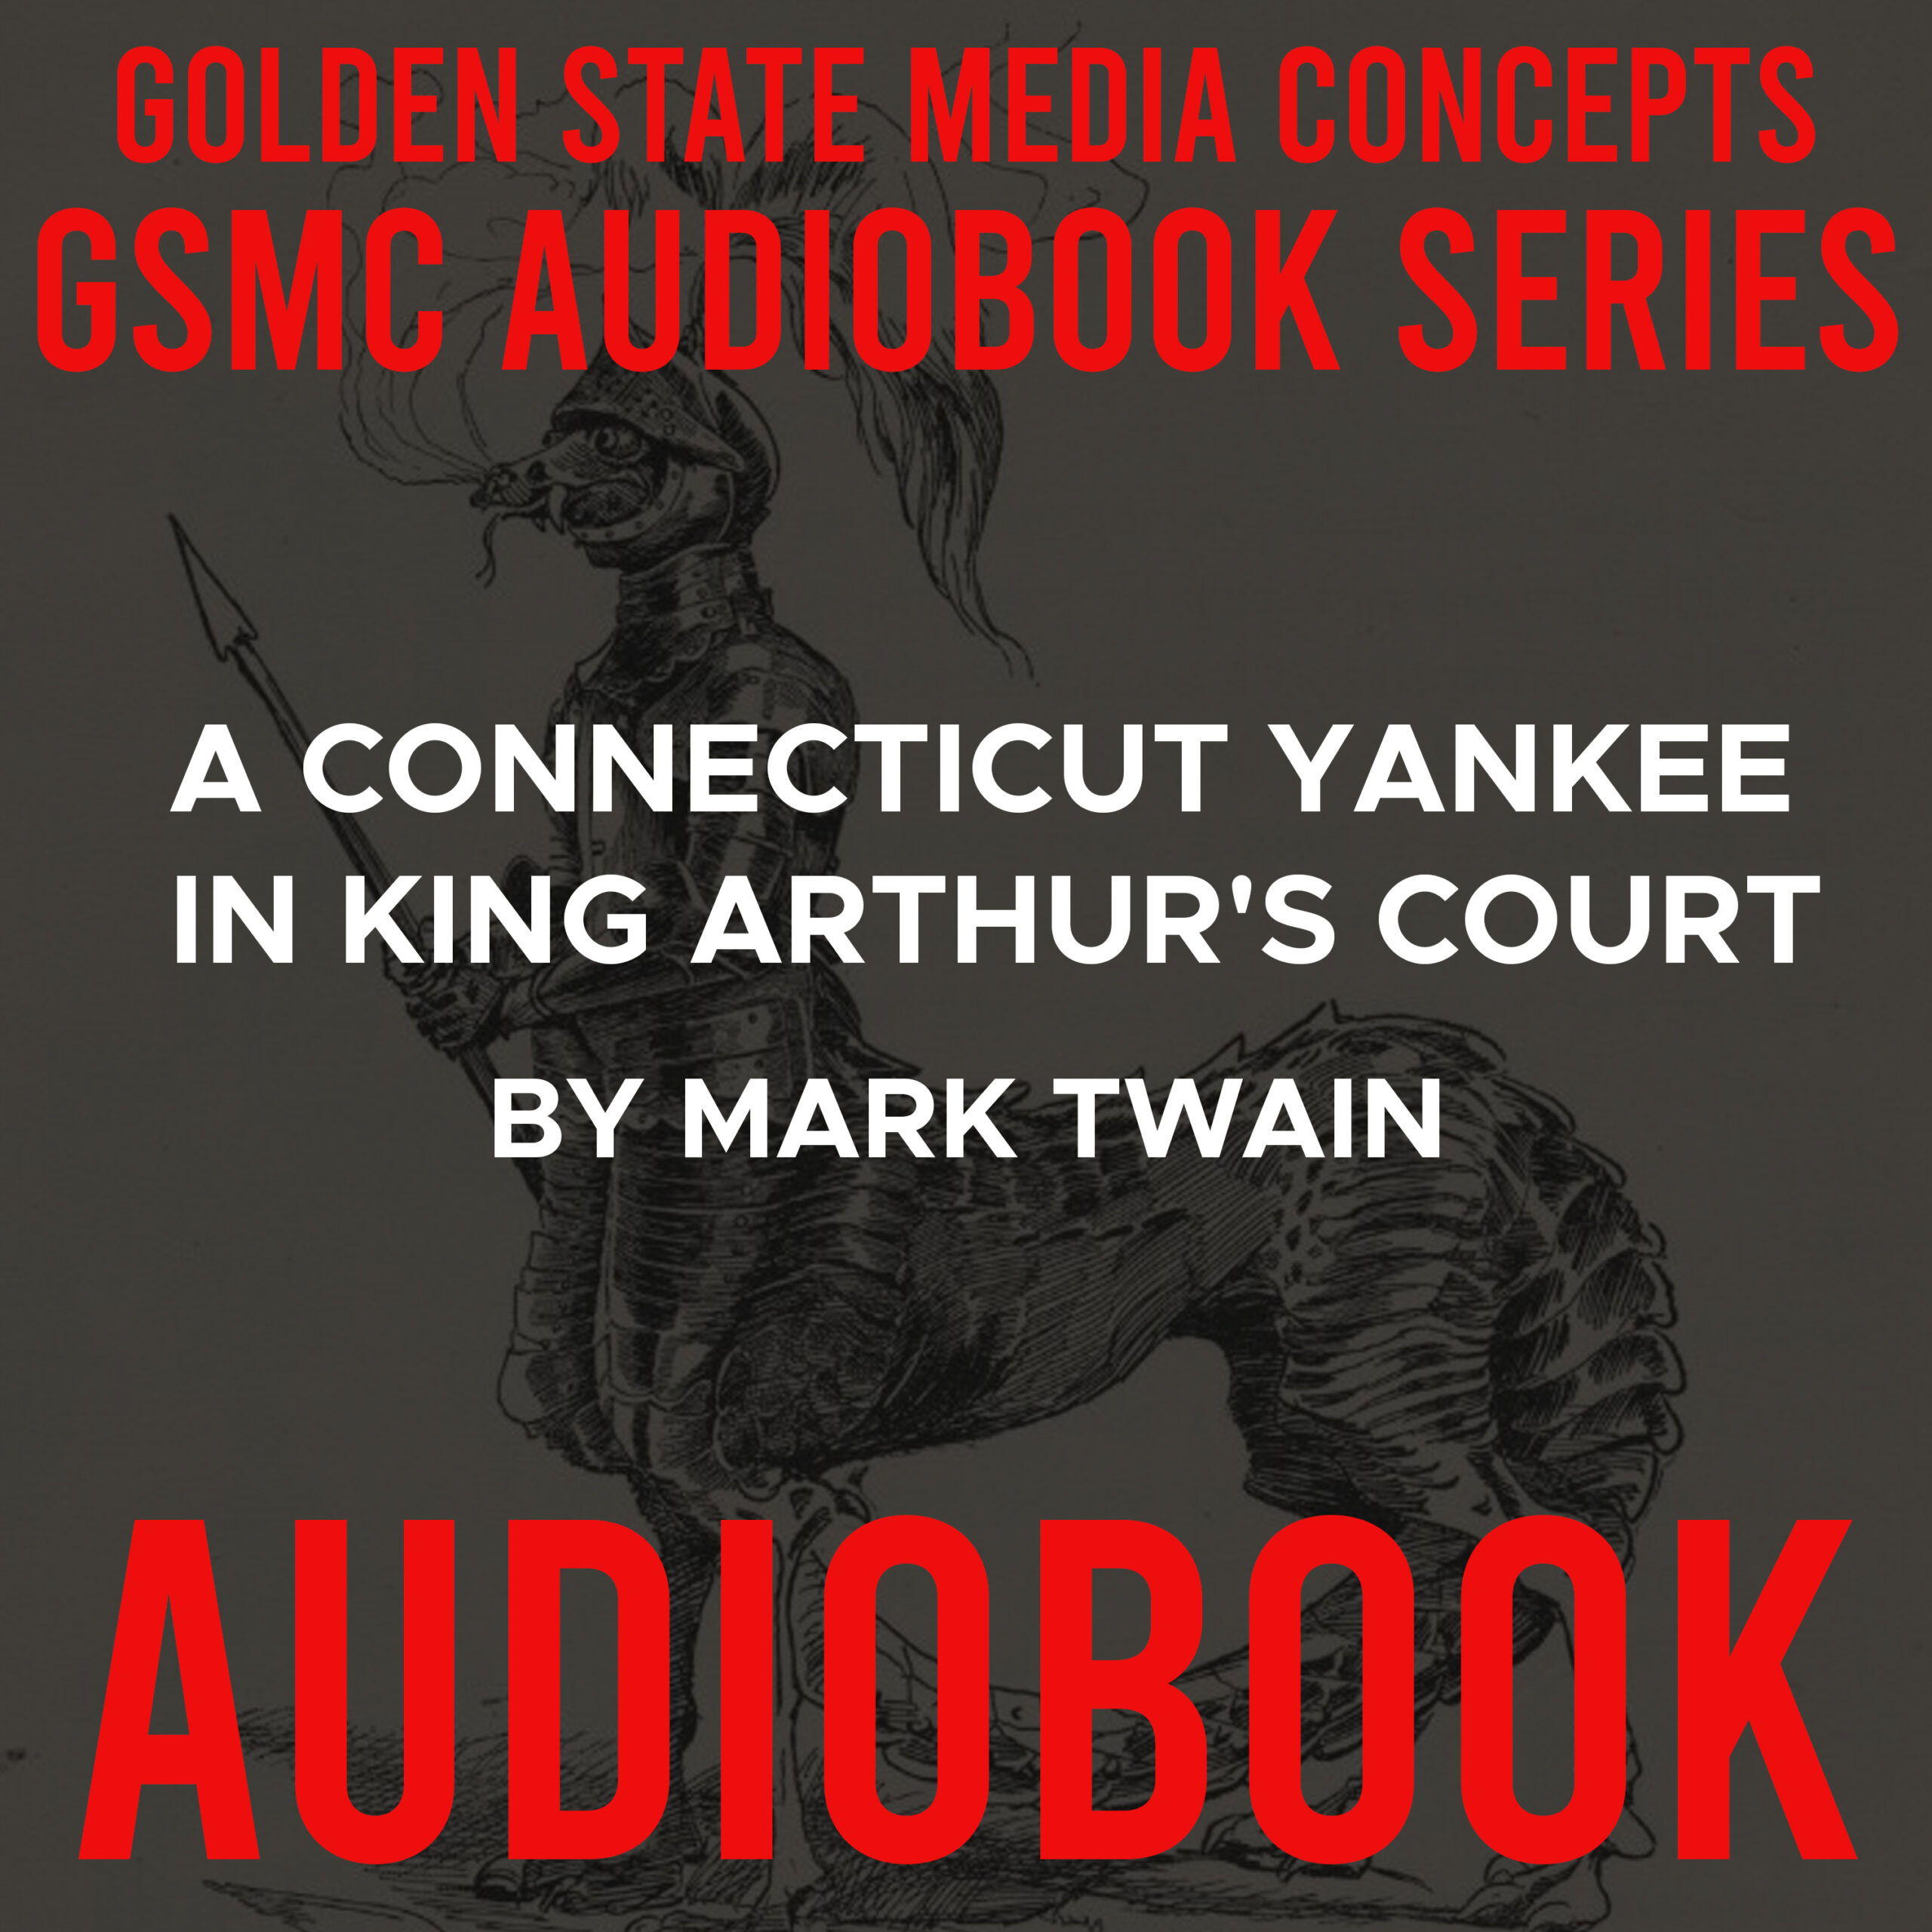 GSMC Audiobook Series: A Connecticut Yankee in King Arthur's Court by Mark Twain